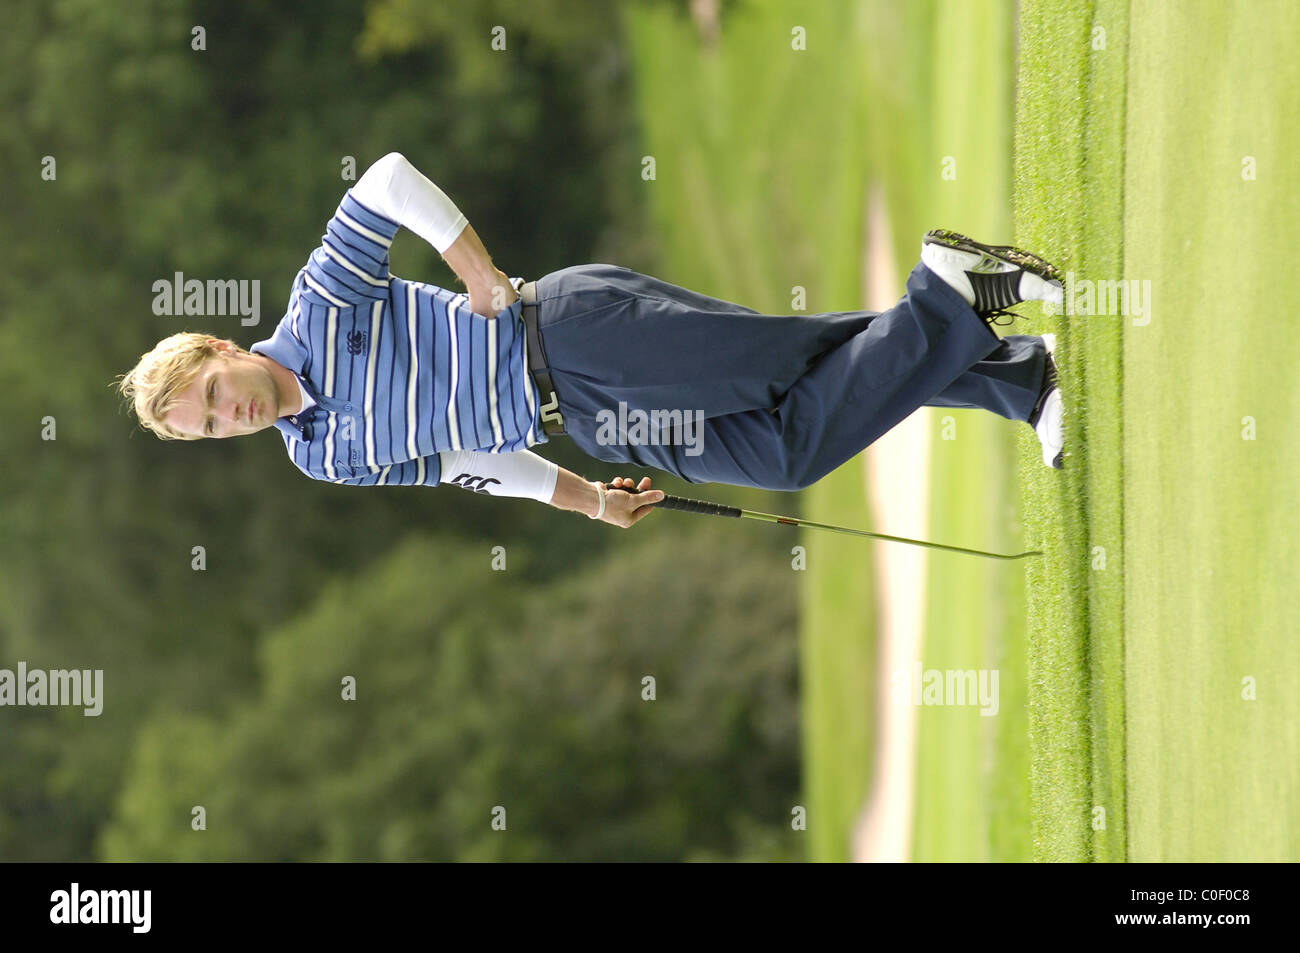 Singer Ronan Keating on the golf course Stock Photo